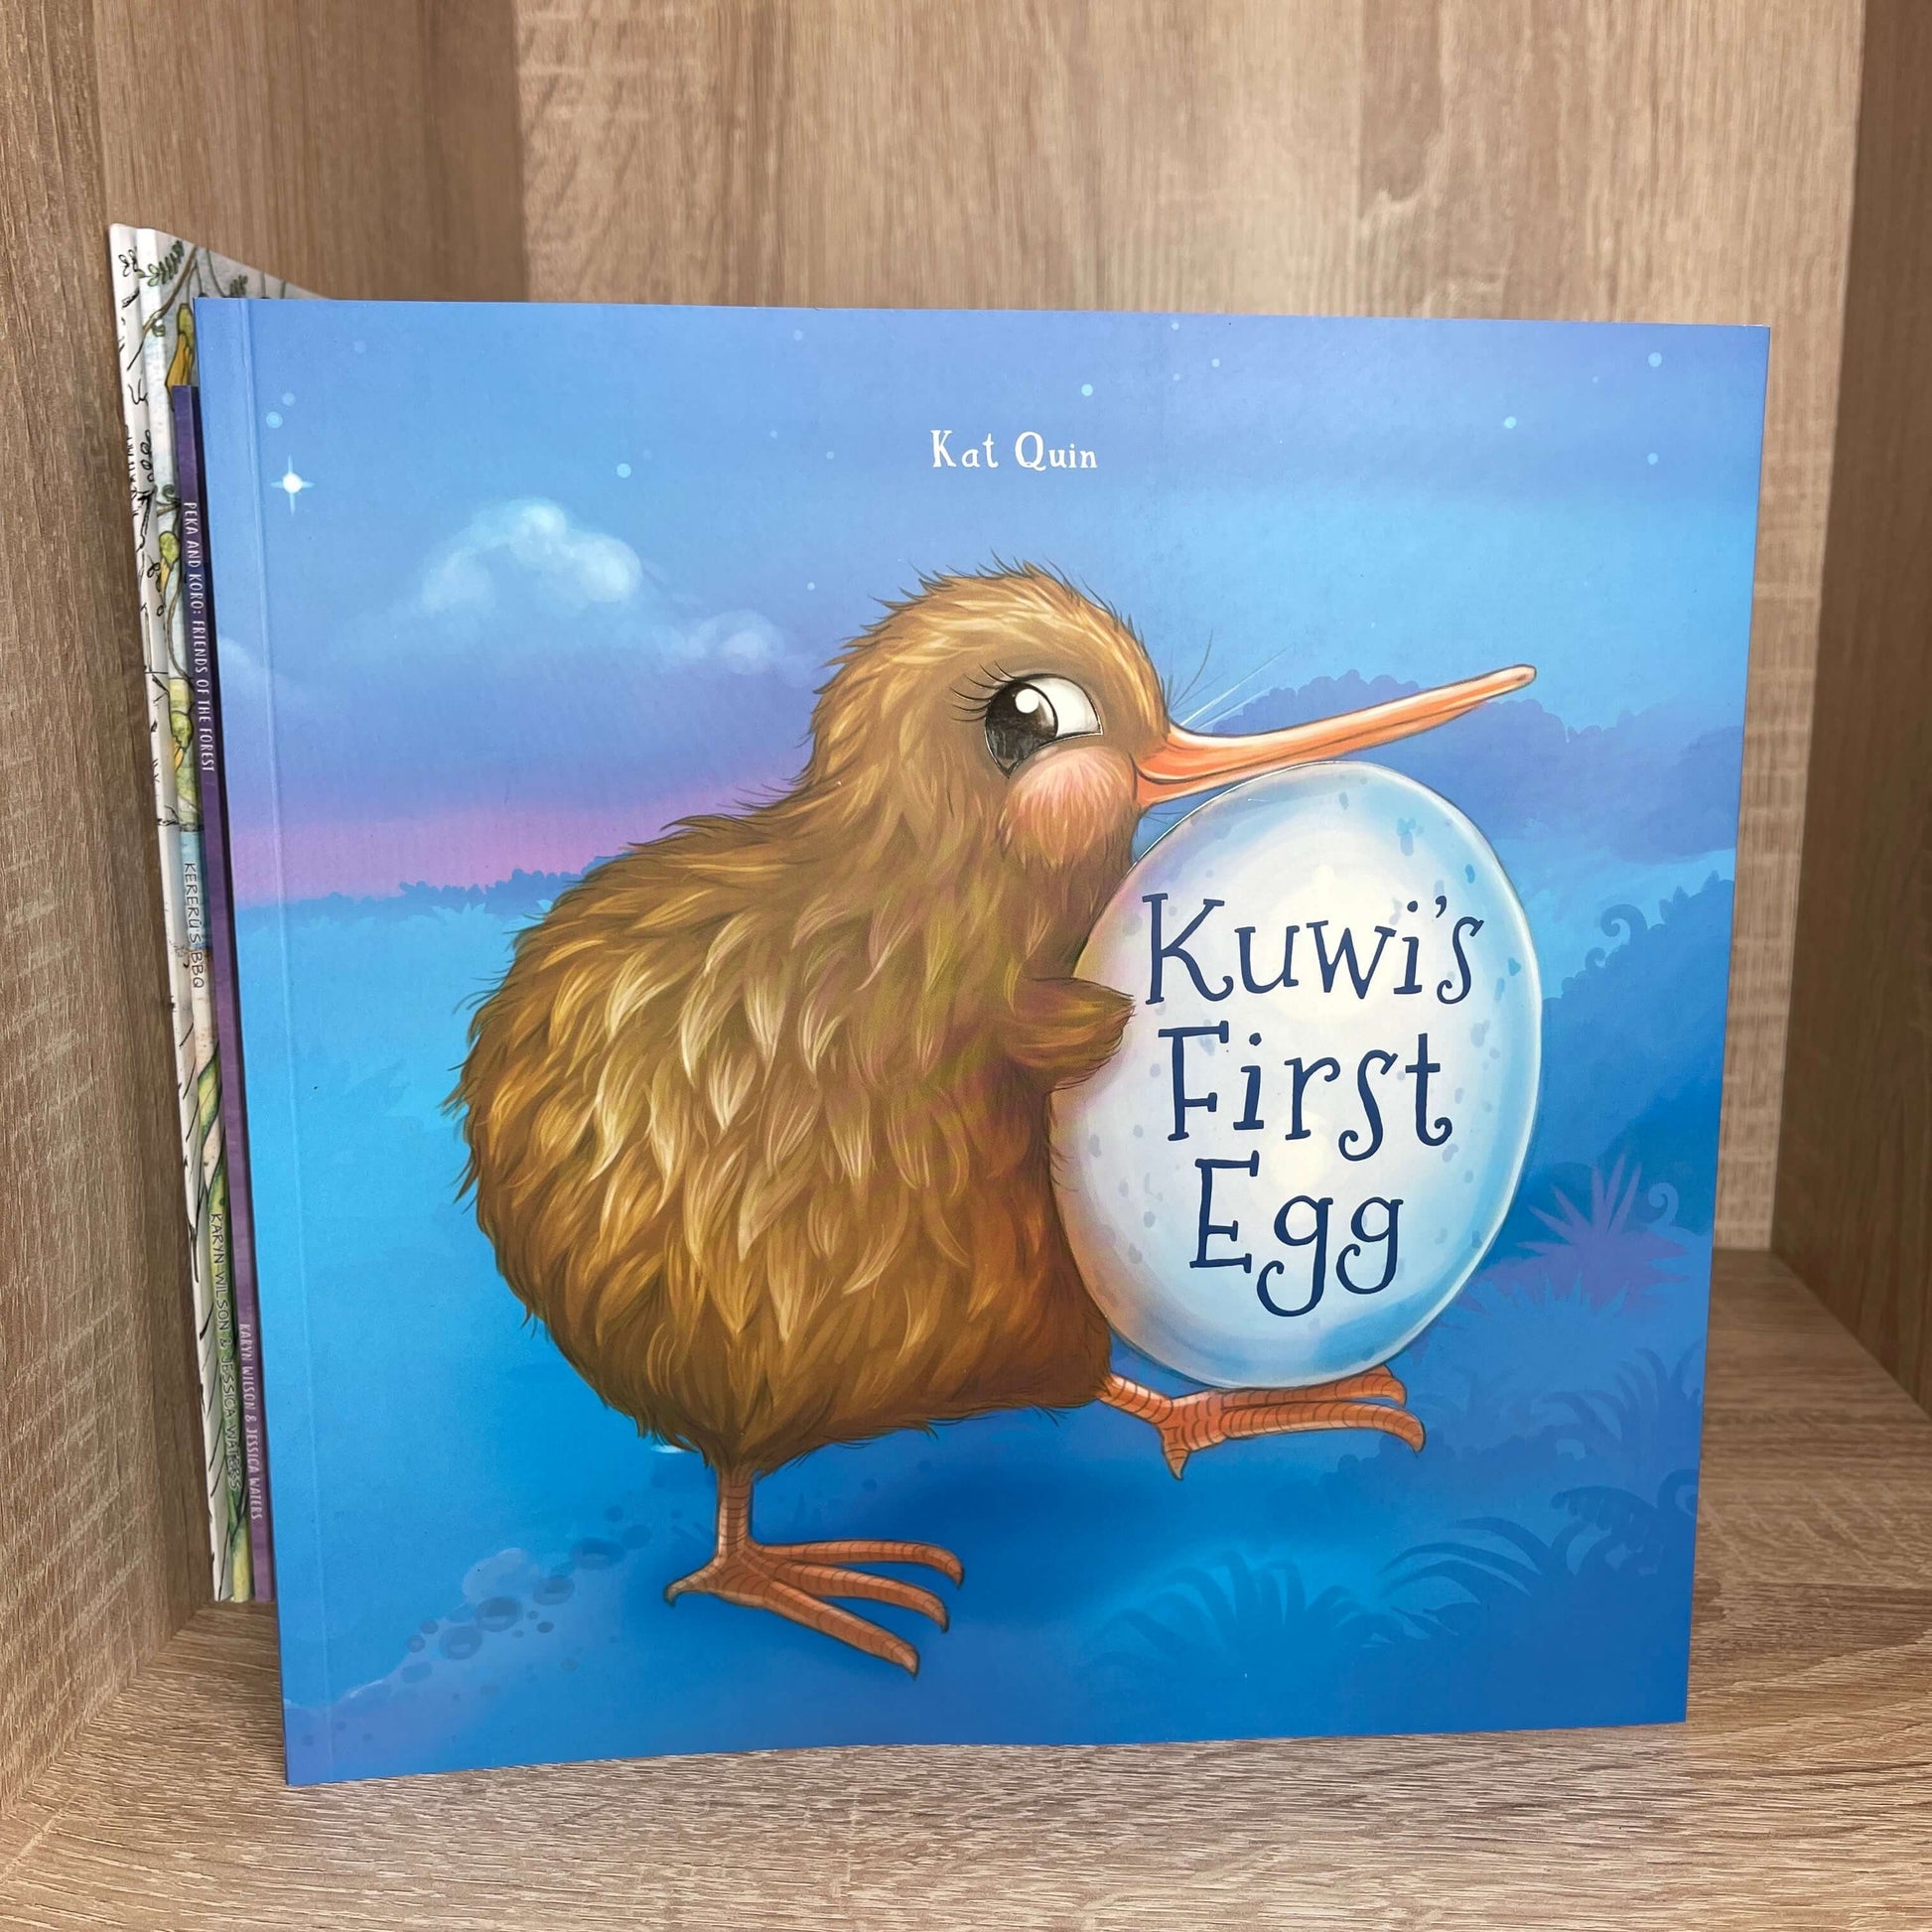 Childrens book Kuwi's First Egg by Kat Merewether.